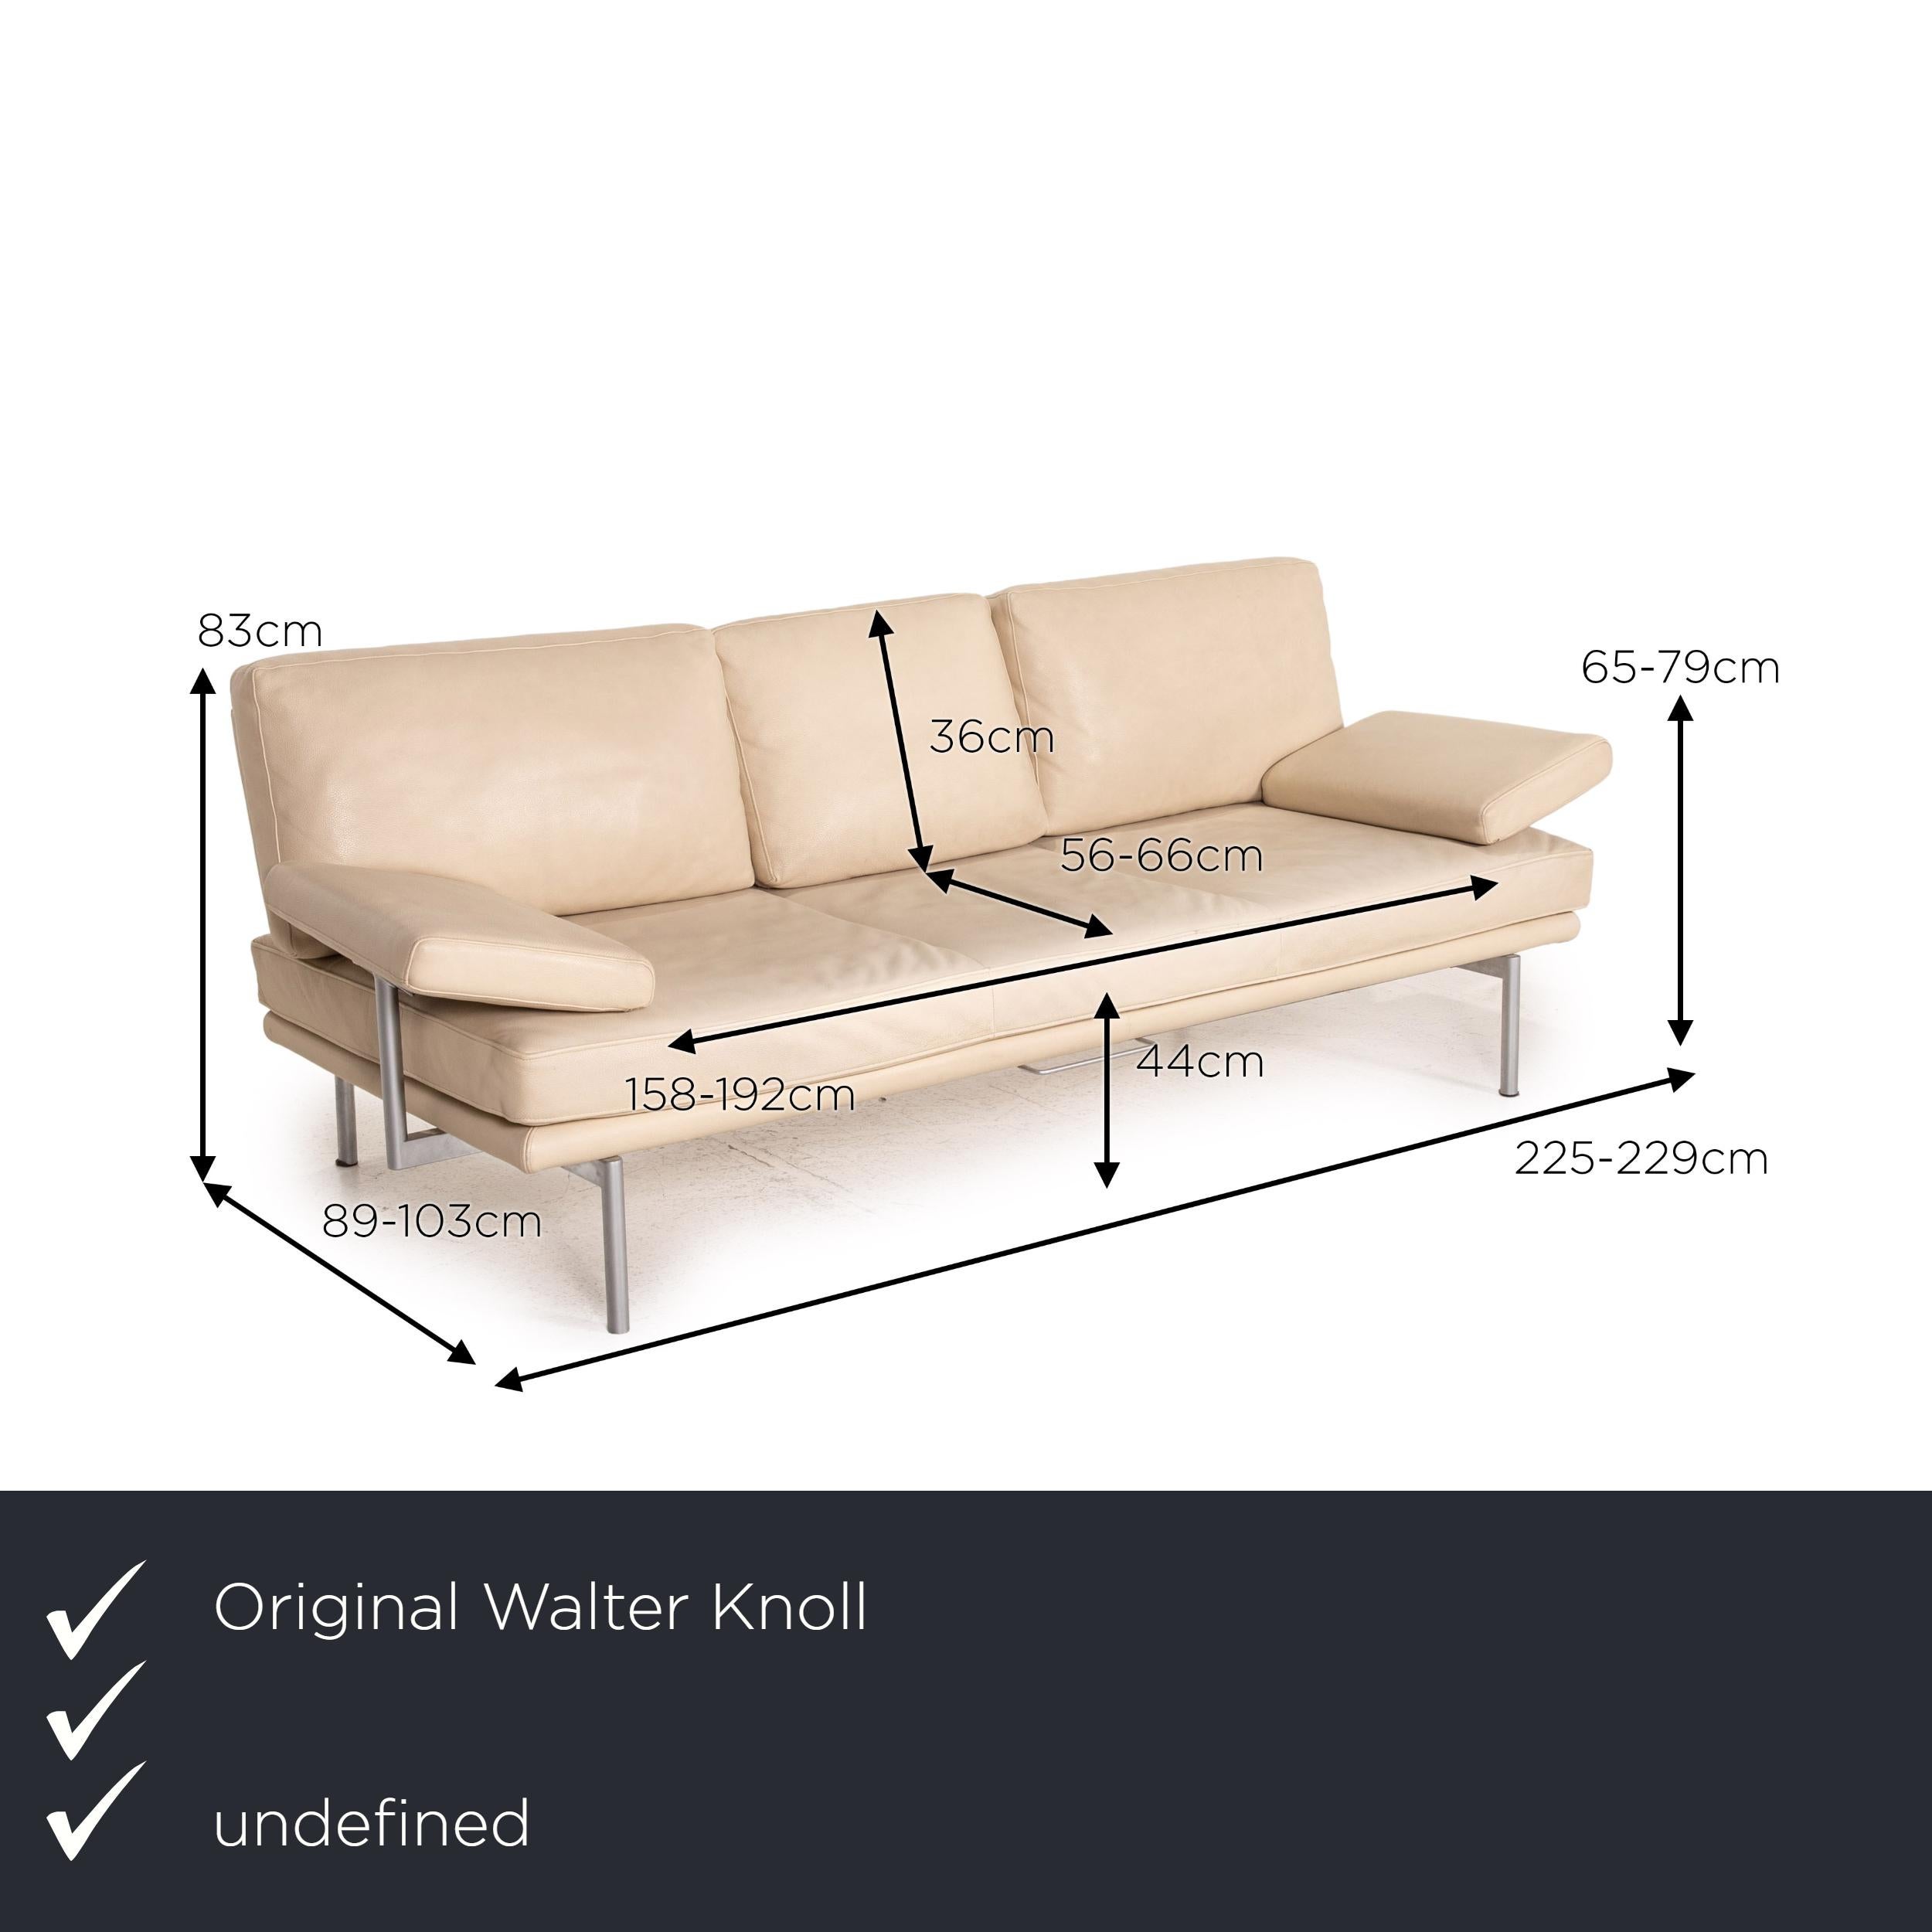 We present to you a Walter Knoll Living platform leather sofa set beige 1x three-seater 1x stool.


 Product measurements in centimeters:
 

Depth: 89
Width: 225
Height: 83
Seat height: 44
Rest height: 65
Seat depth: 53
Seat width: